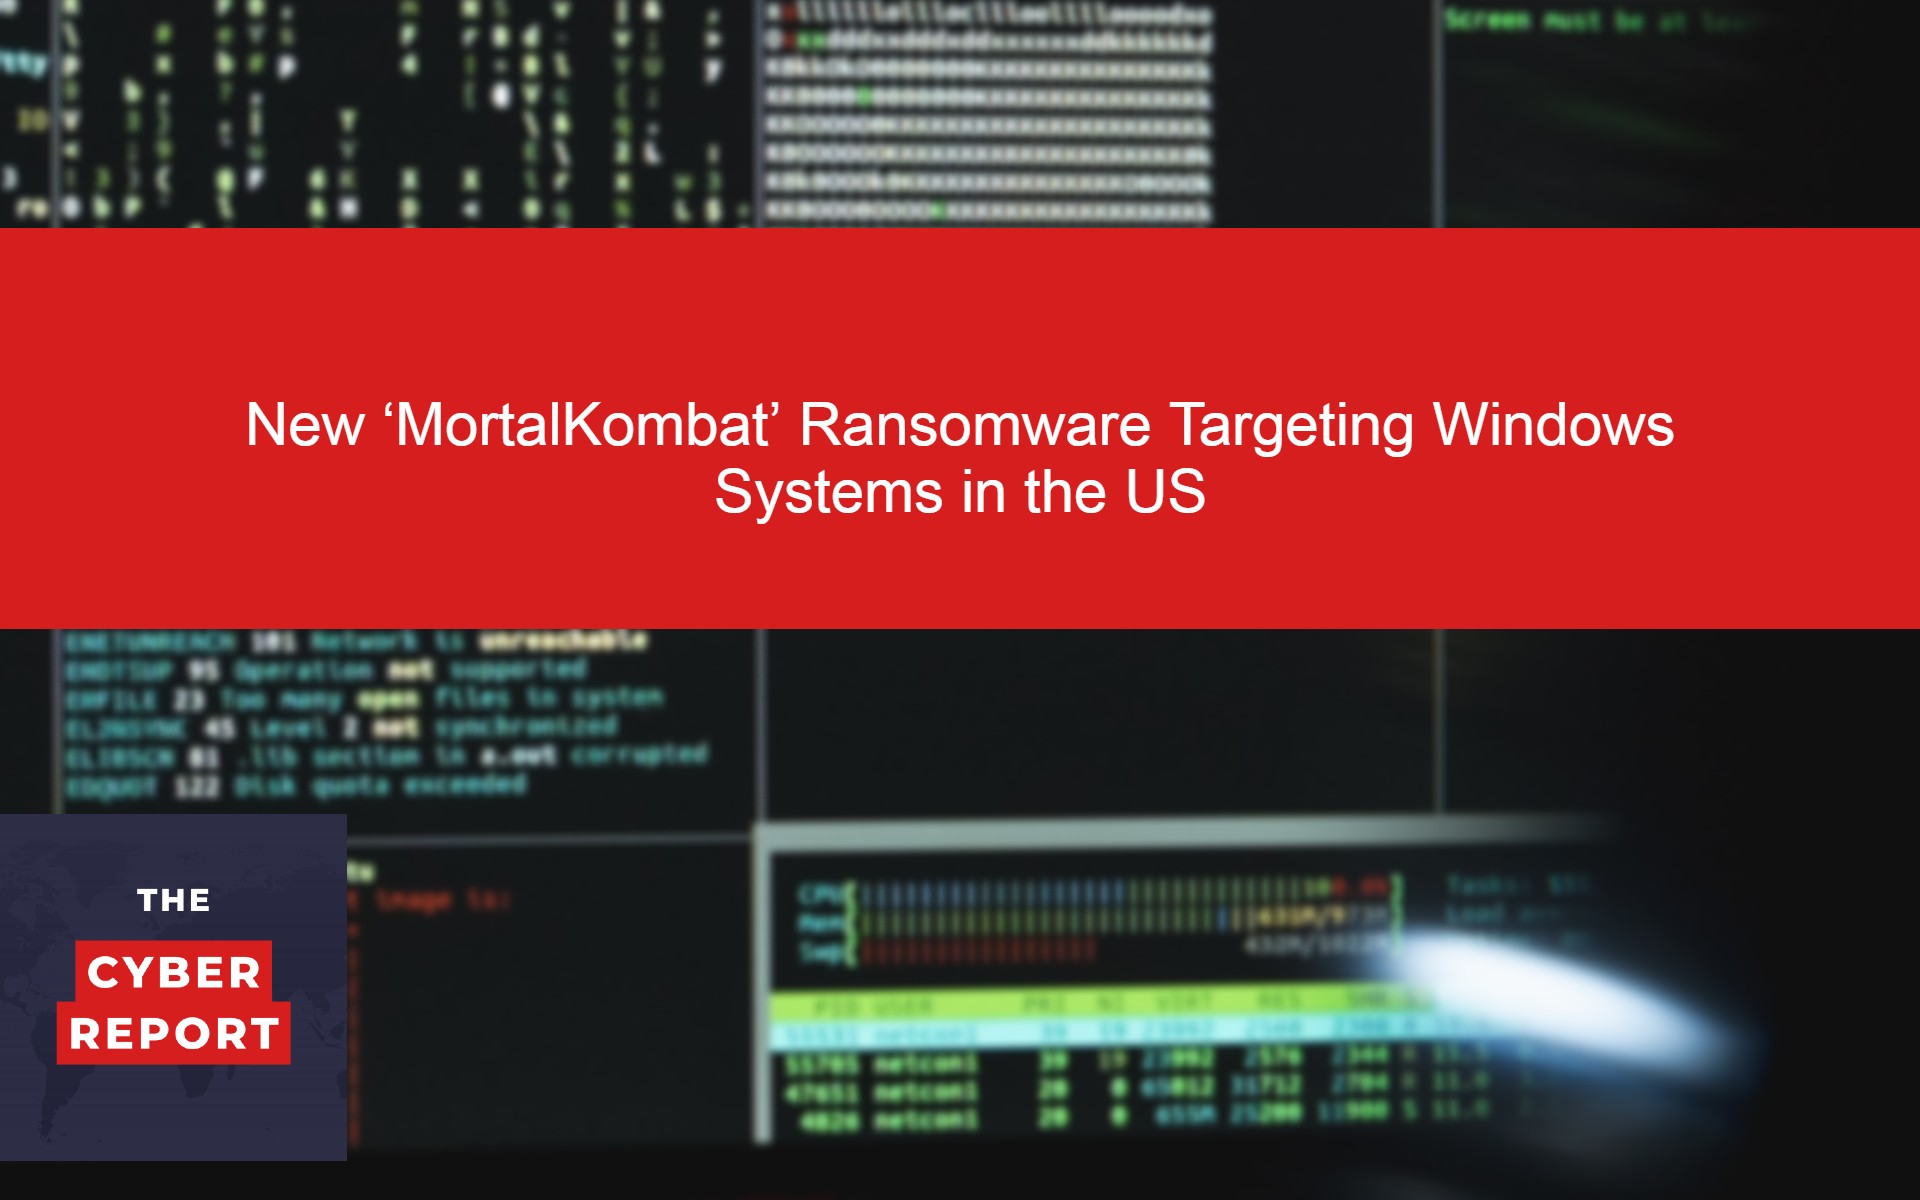 New Mortal Kombat Ransomware Targeting Windows Systems in the US